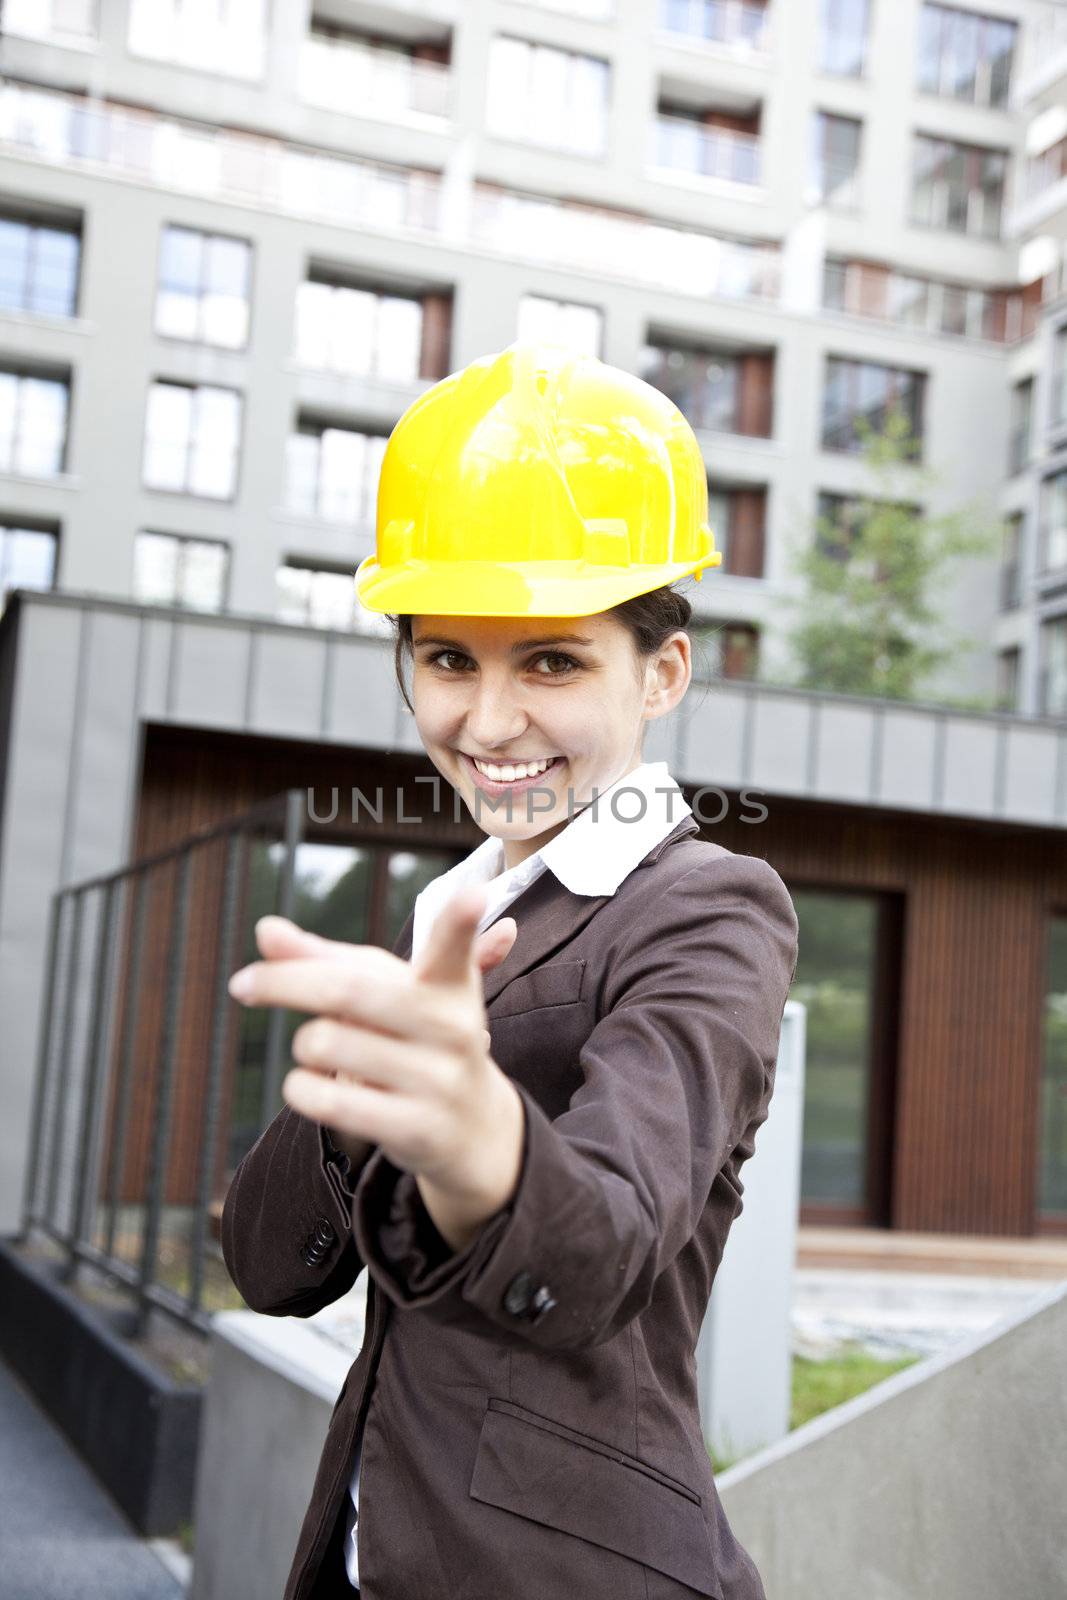 Young female construction engineer with phone